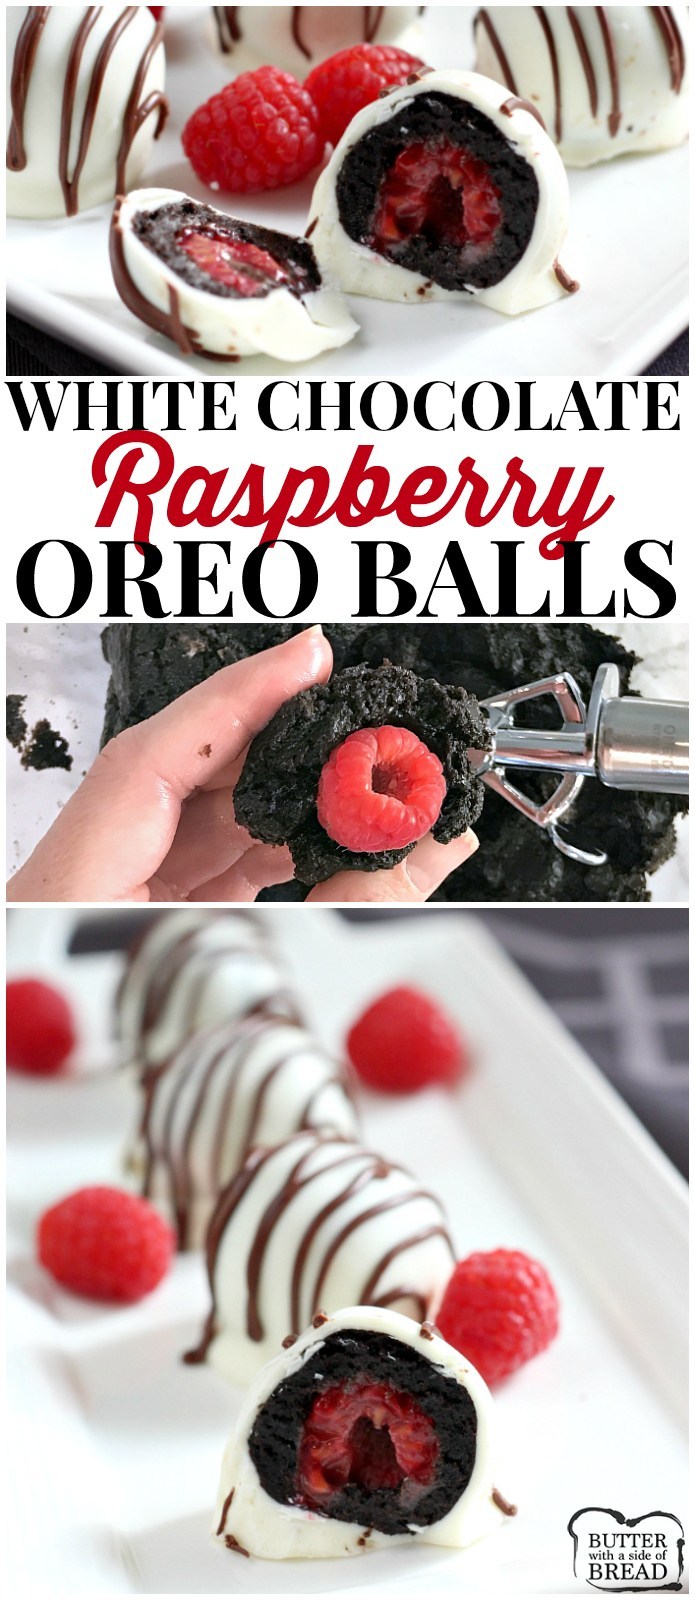 White Chocolate Raspberry Oreo Balls are a delicious no-bake treat made with Oreo cookies, cream cheese and a raspberry in the middle! The Oreo Balls are dipped in a white chocolate candy coating and coated with a chocolate drizzle. 